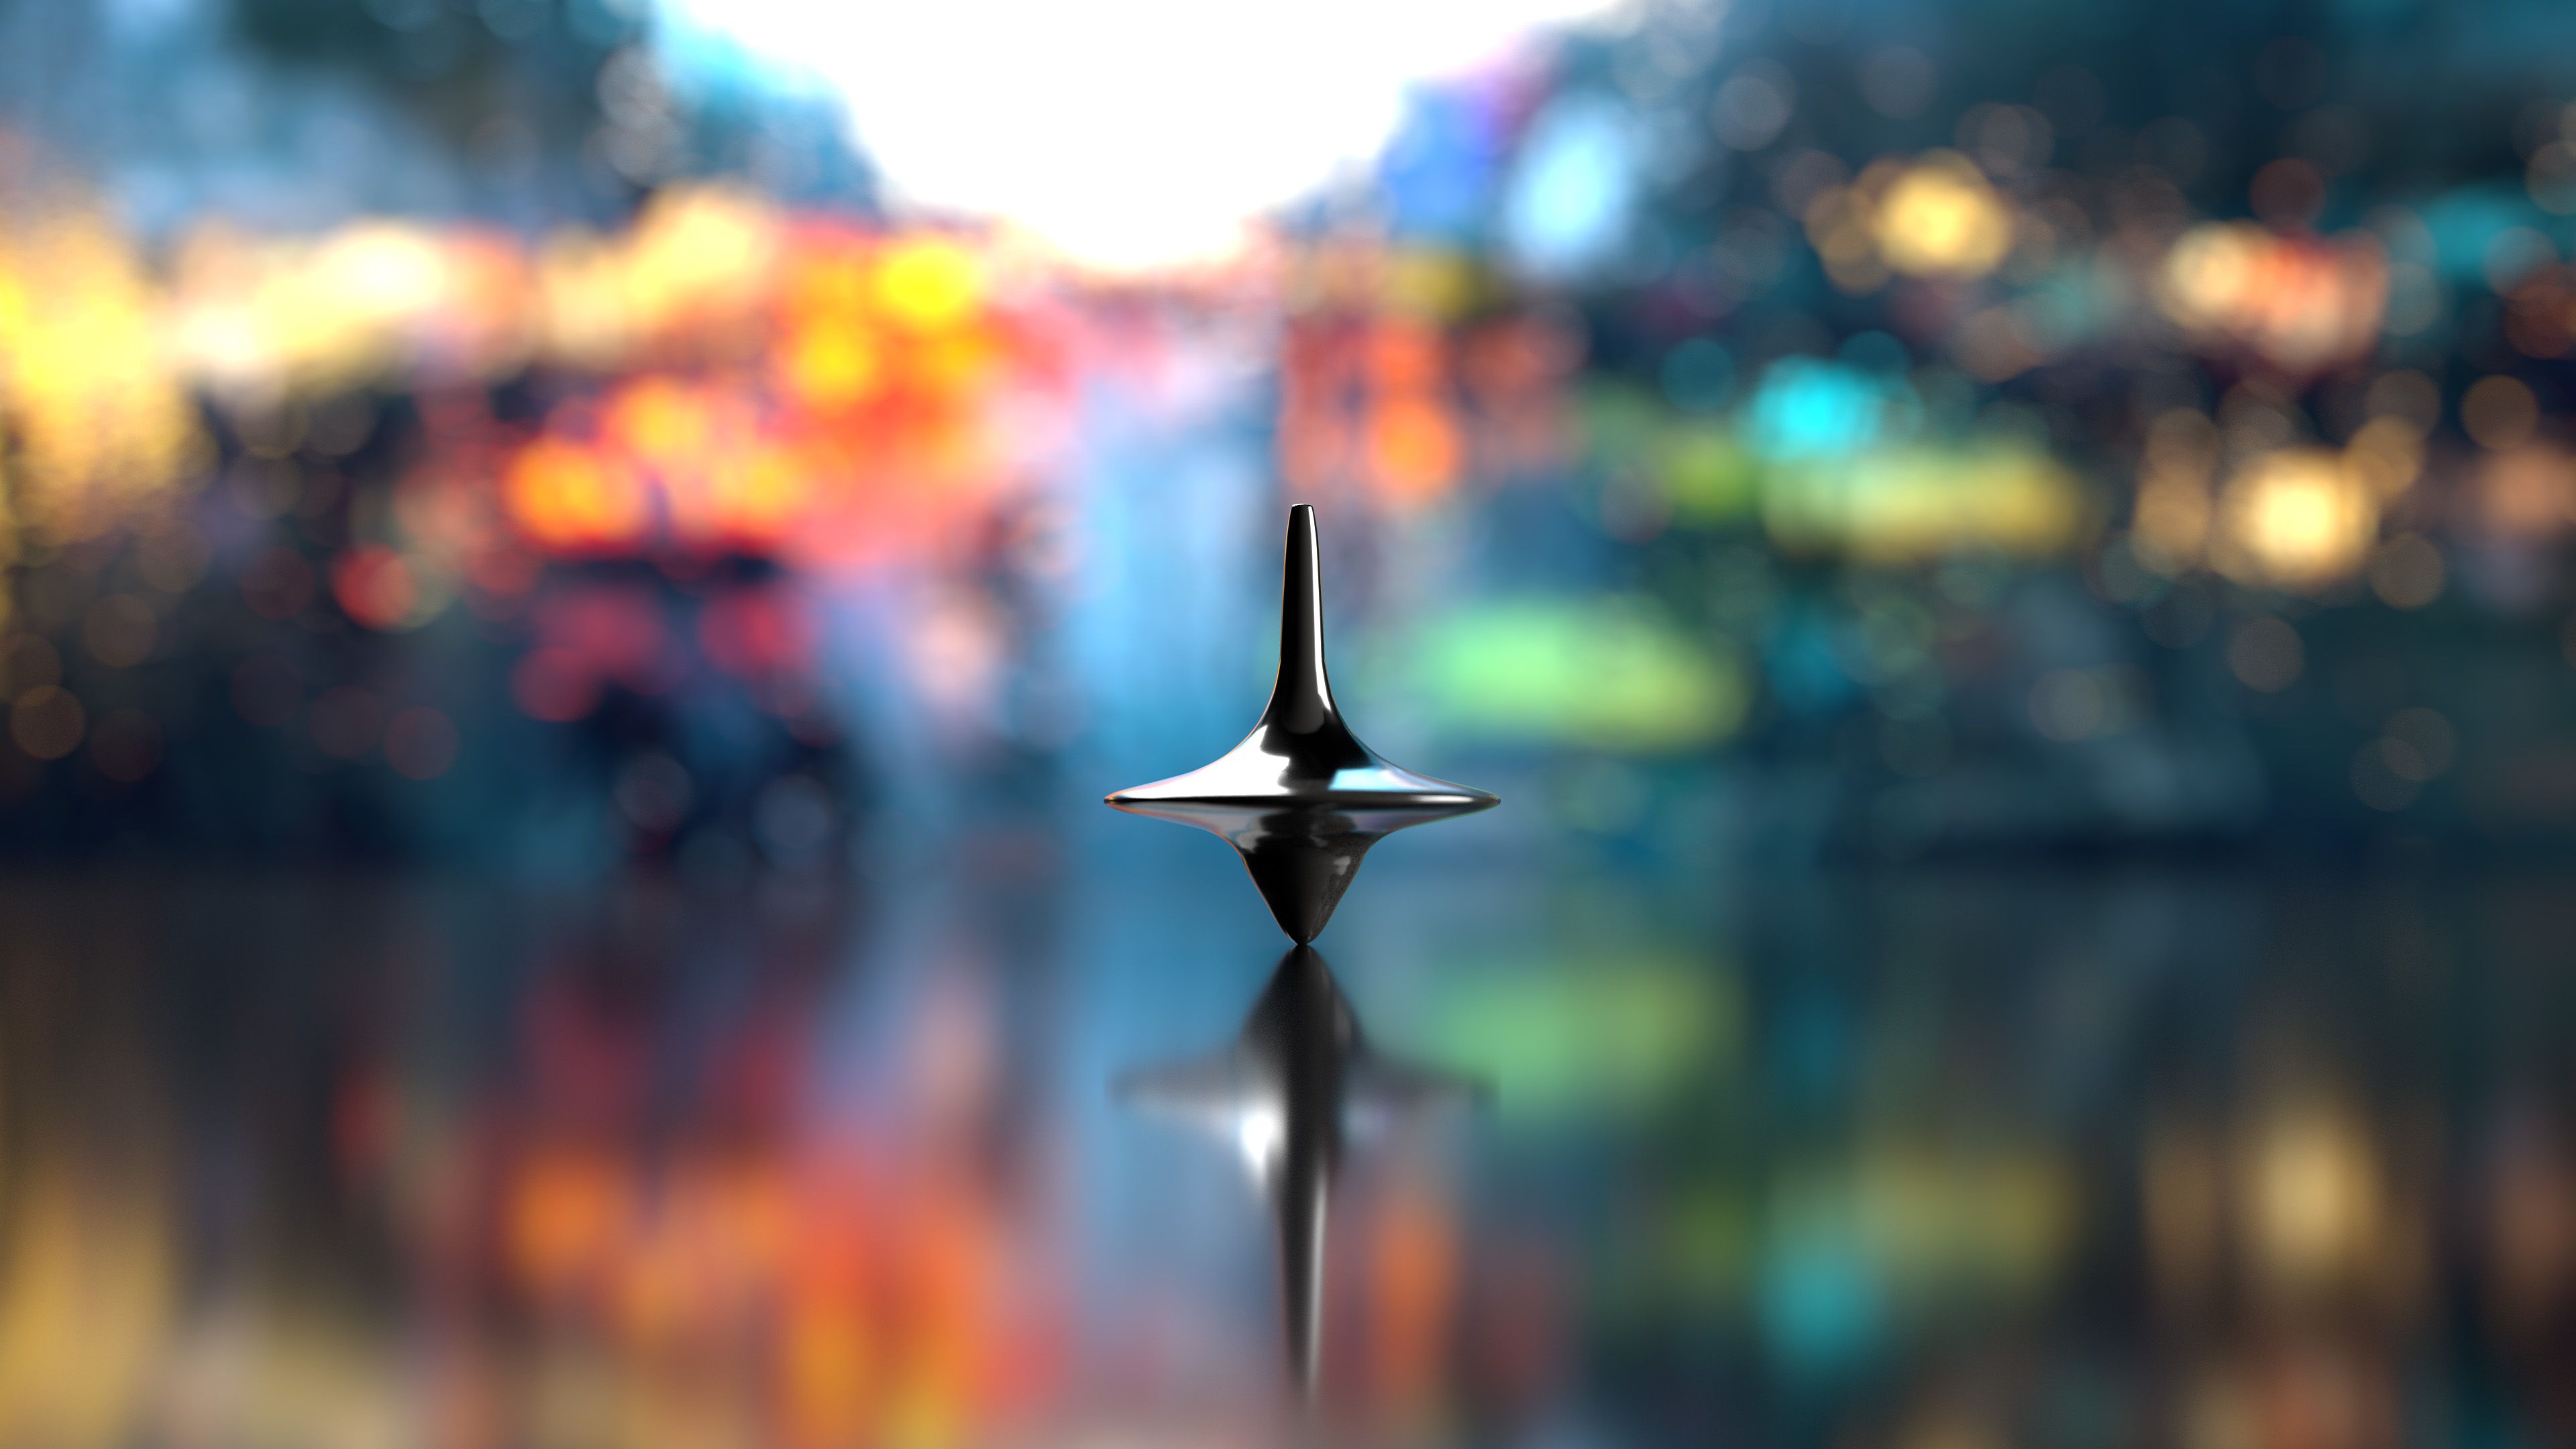 Inception 4k Ultra HD Wallpaper. Background Imagex2160